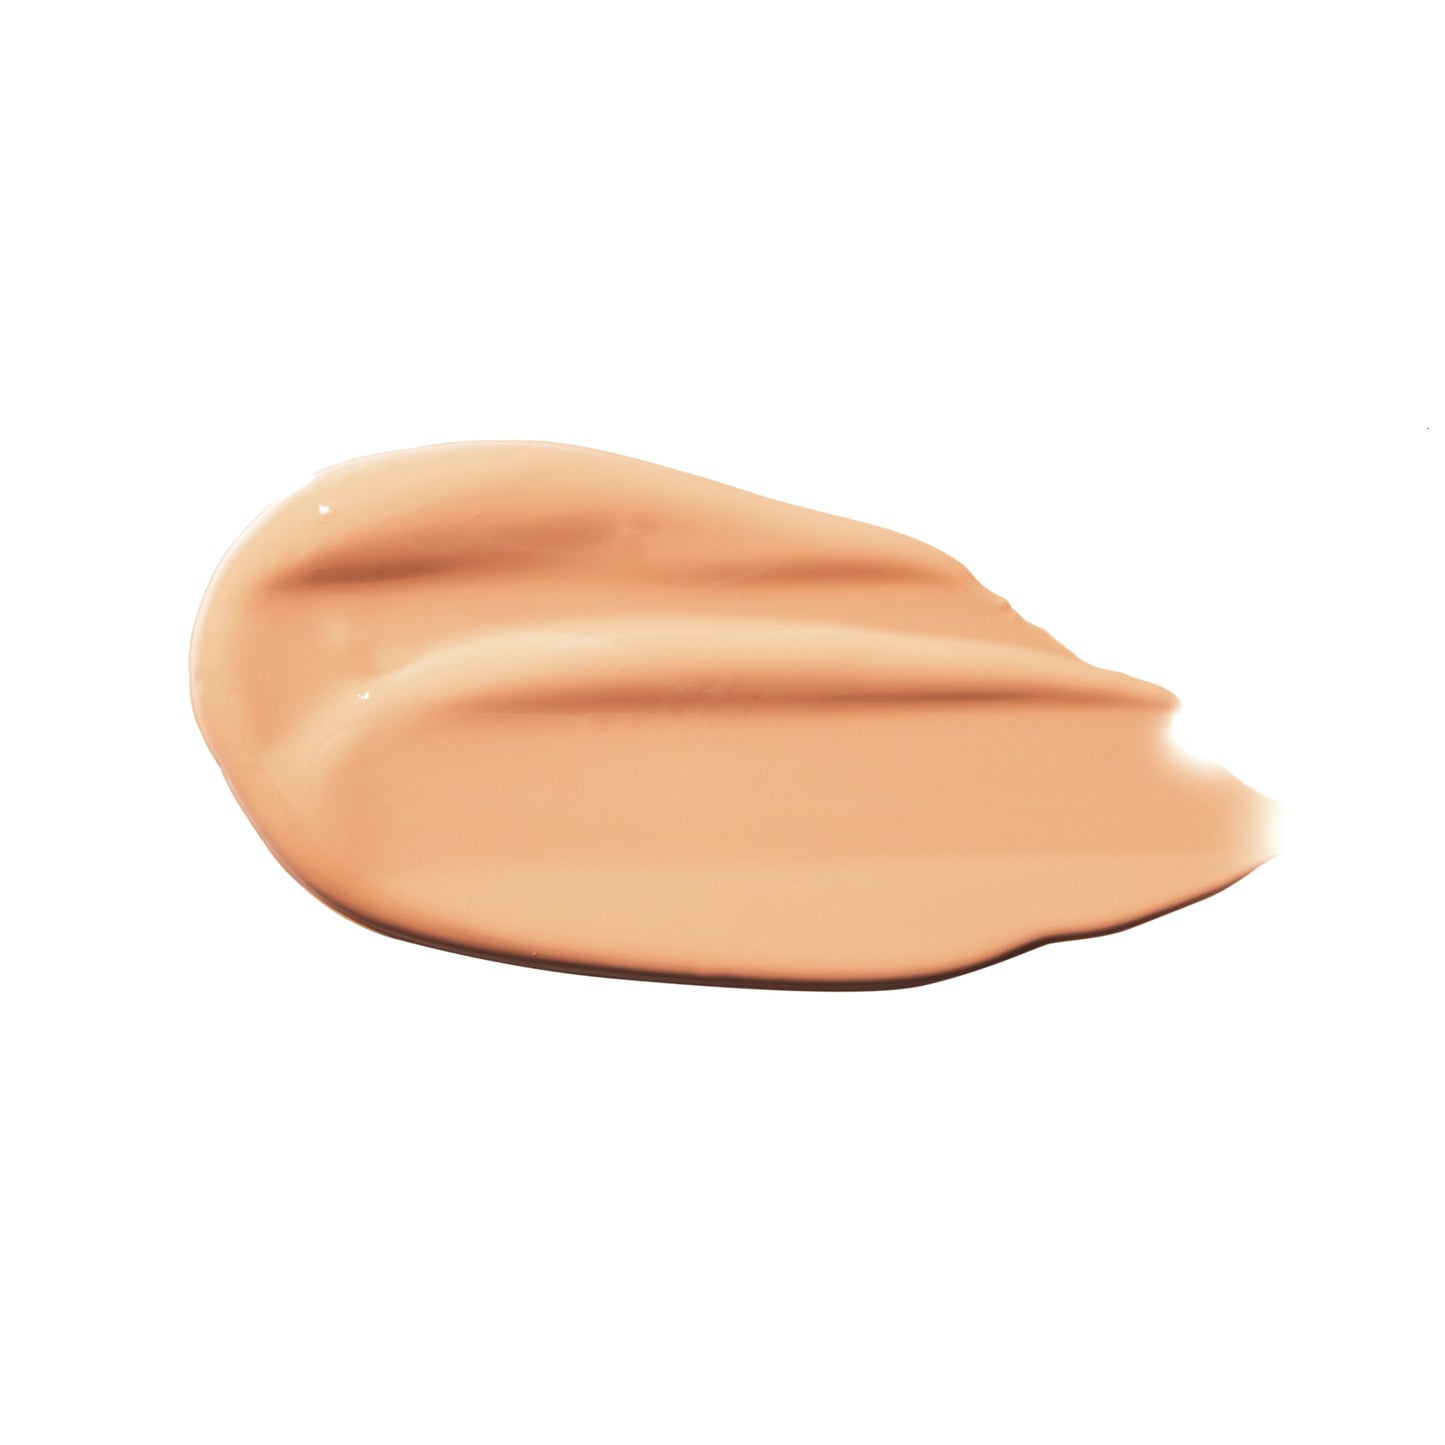 100% PURE Fruit Pigmented Healthy Foundation white peach